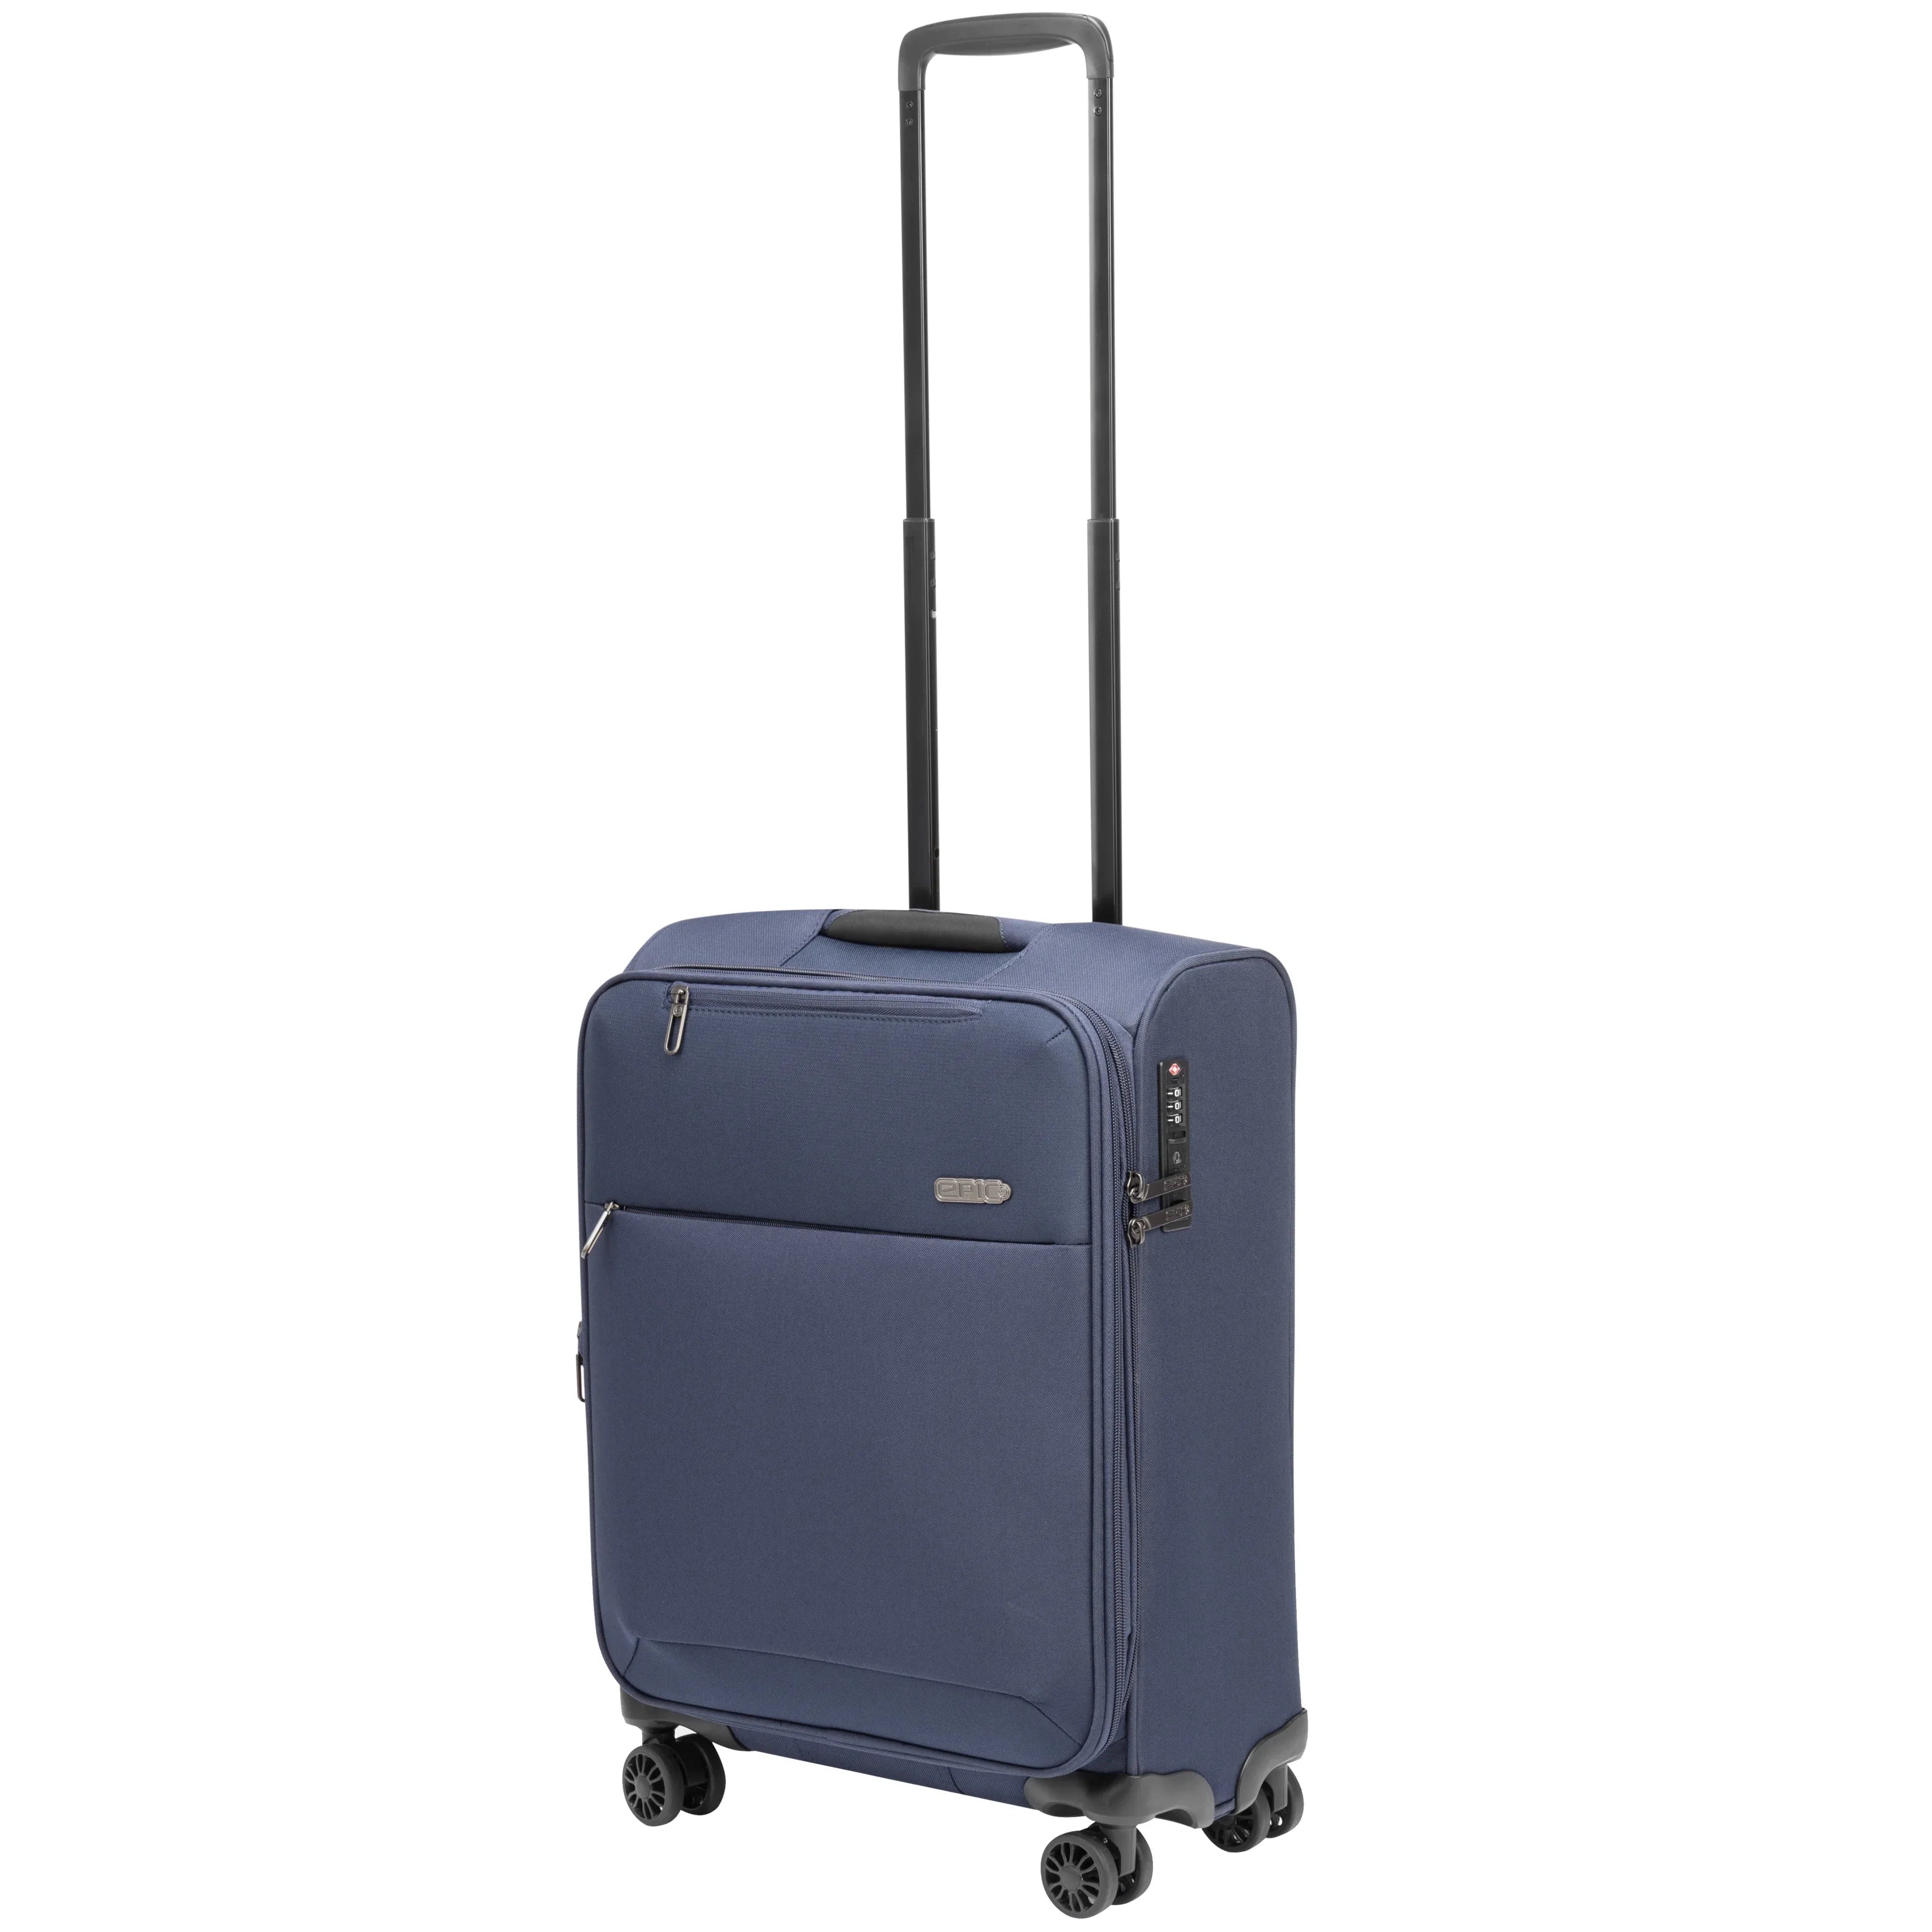 Epic Discovery Neo 4-wheel trolley 55 cm - navy blue